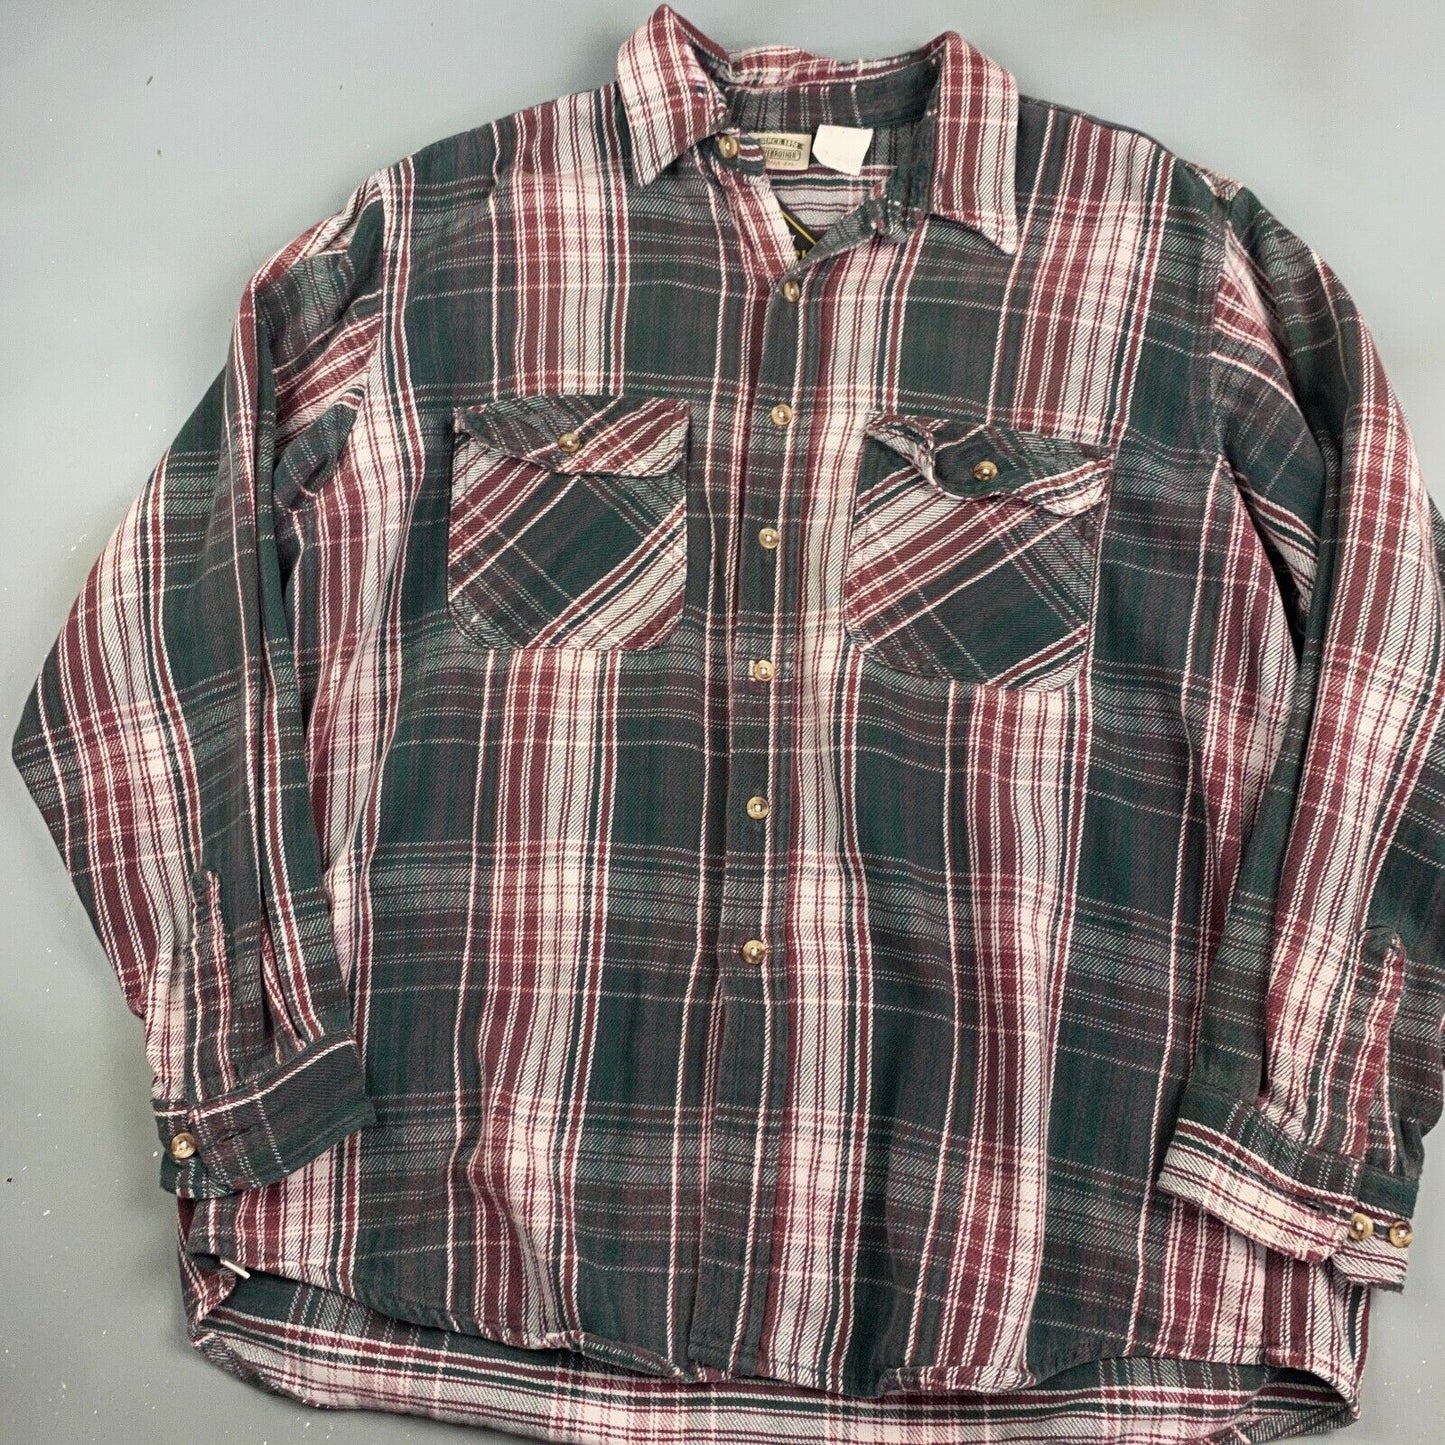 VINTAGE FiveBrother Plaid Flannel Button Up Shirt sz 2XL Tall Adult